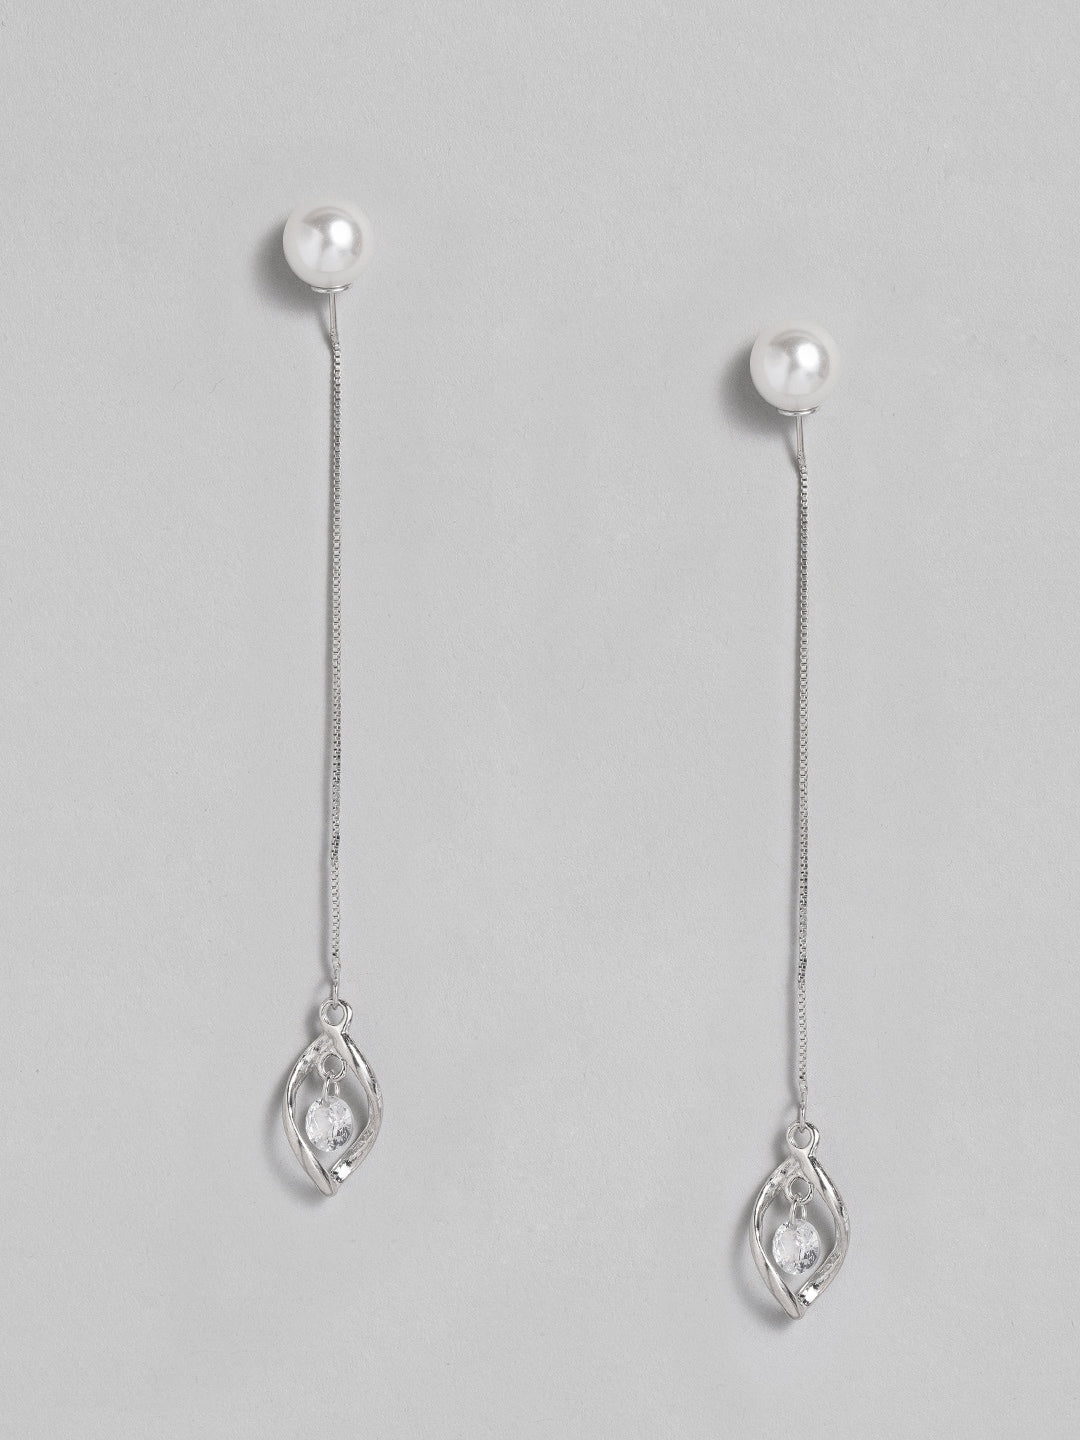 EL REGALO White & Silver-Toned Pearl Beaded Contemporary Double-Sided Drop Earrings - for Women and Girls
Style ID: 16193862